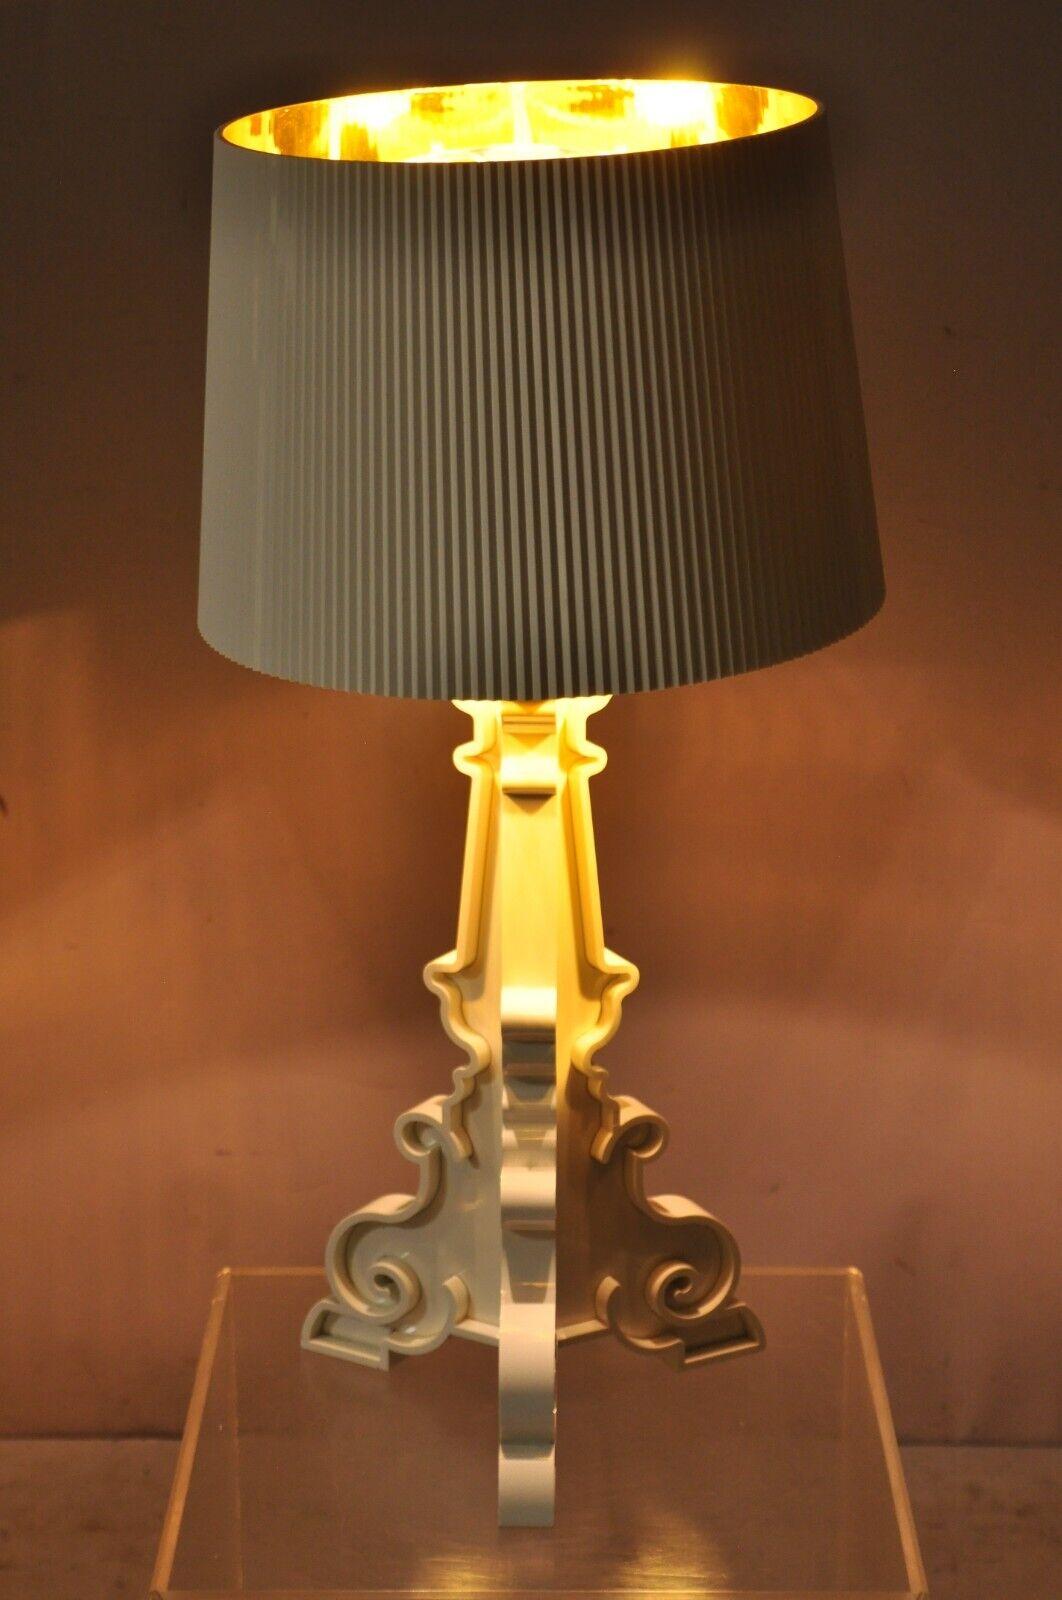 Kartell Ferruccio Laviani Bourgie White Baroque Table Lamp with Shade For Sale 4